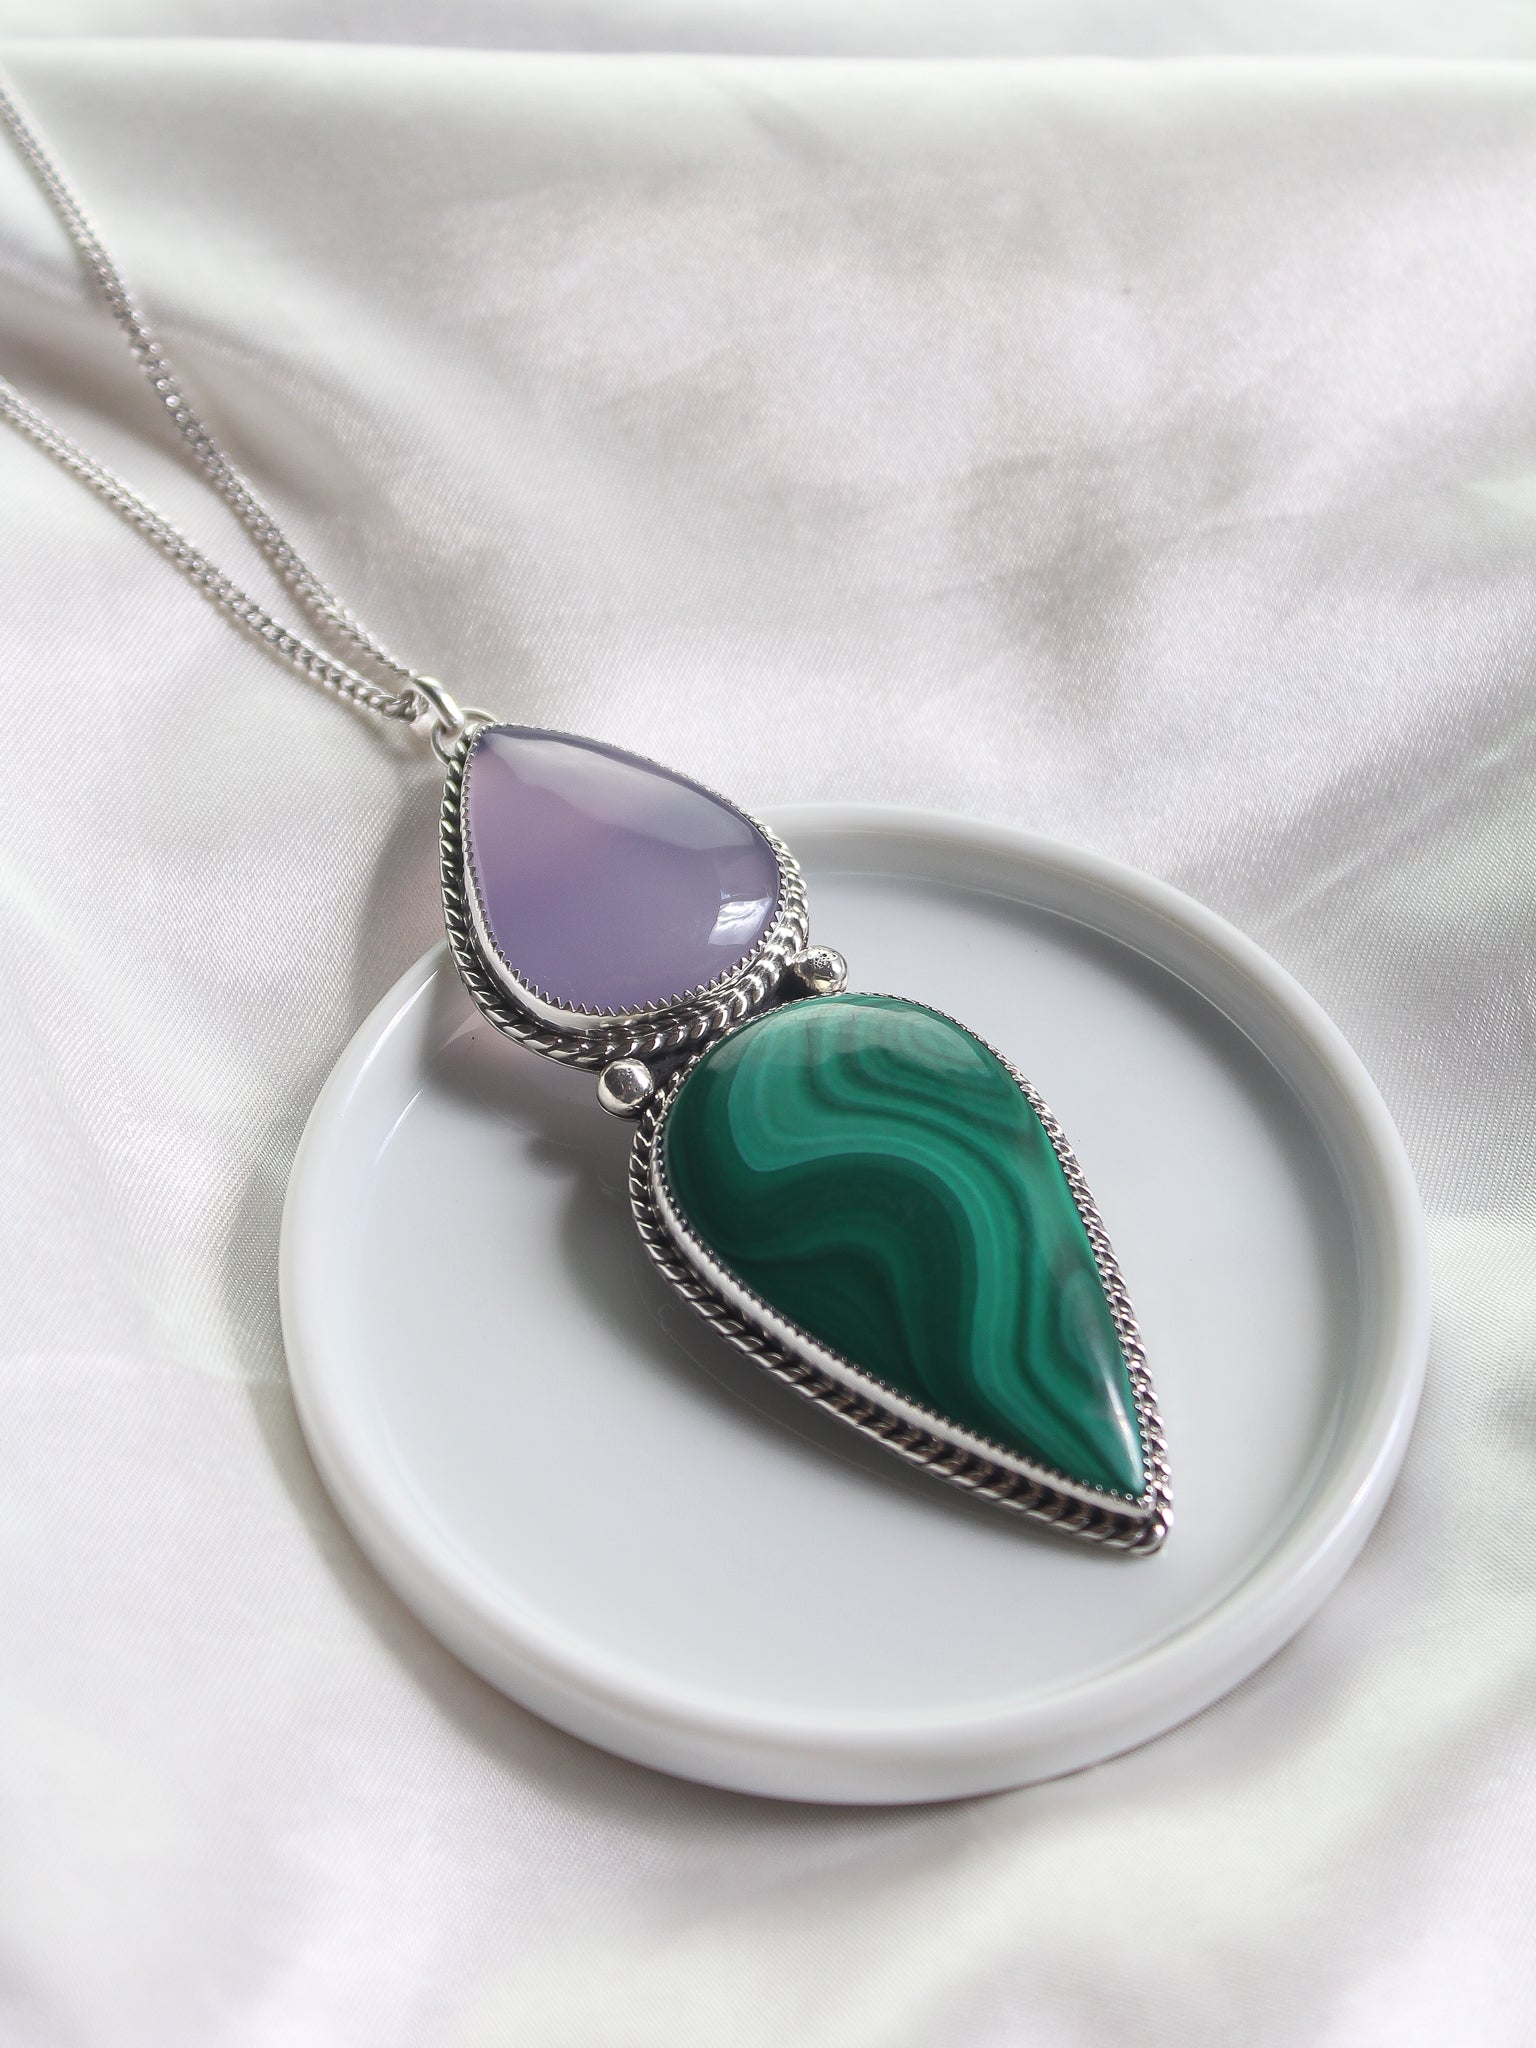 Large handmade 925 sterling silver pendant with lavender chalcedony and malachite lily and William jewelry